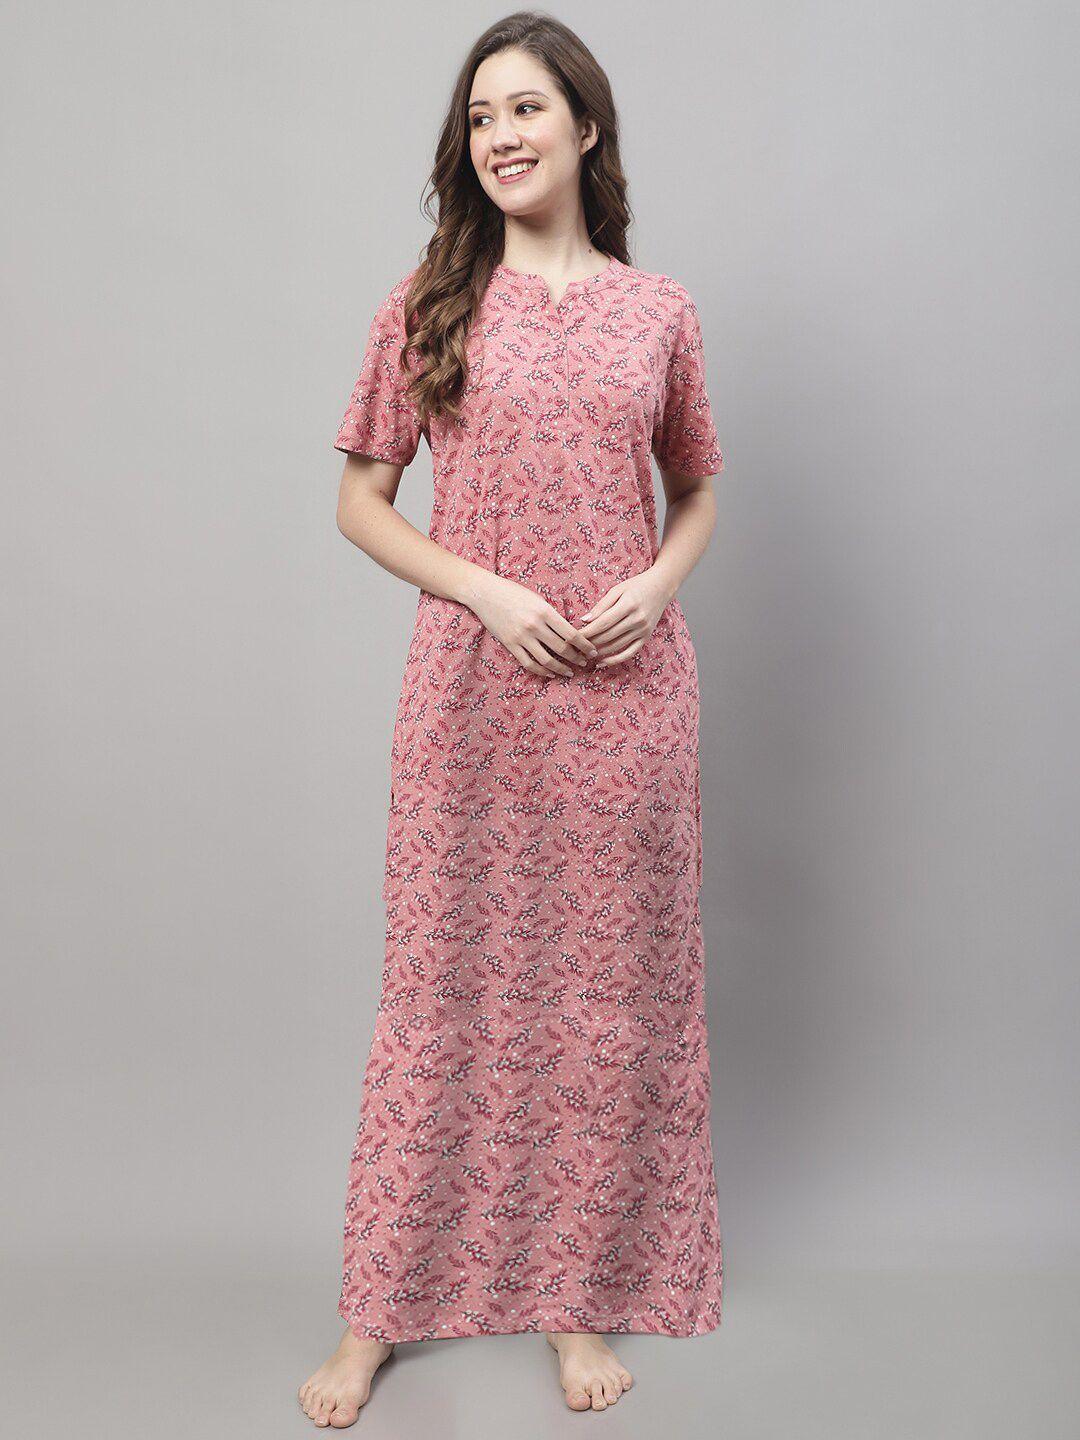 kanvin floral printed pure cotton maxi nightdress